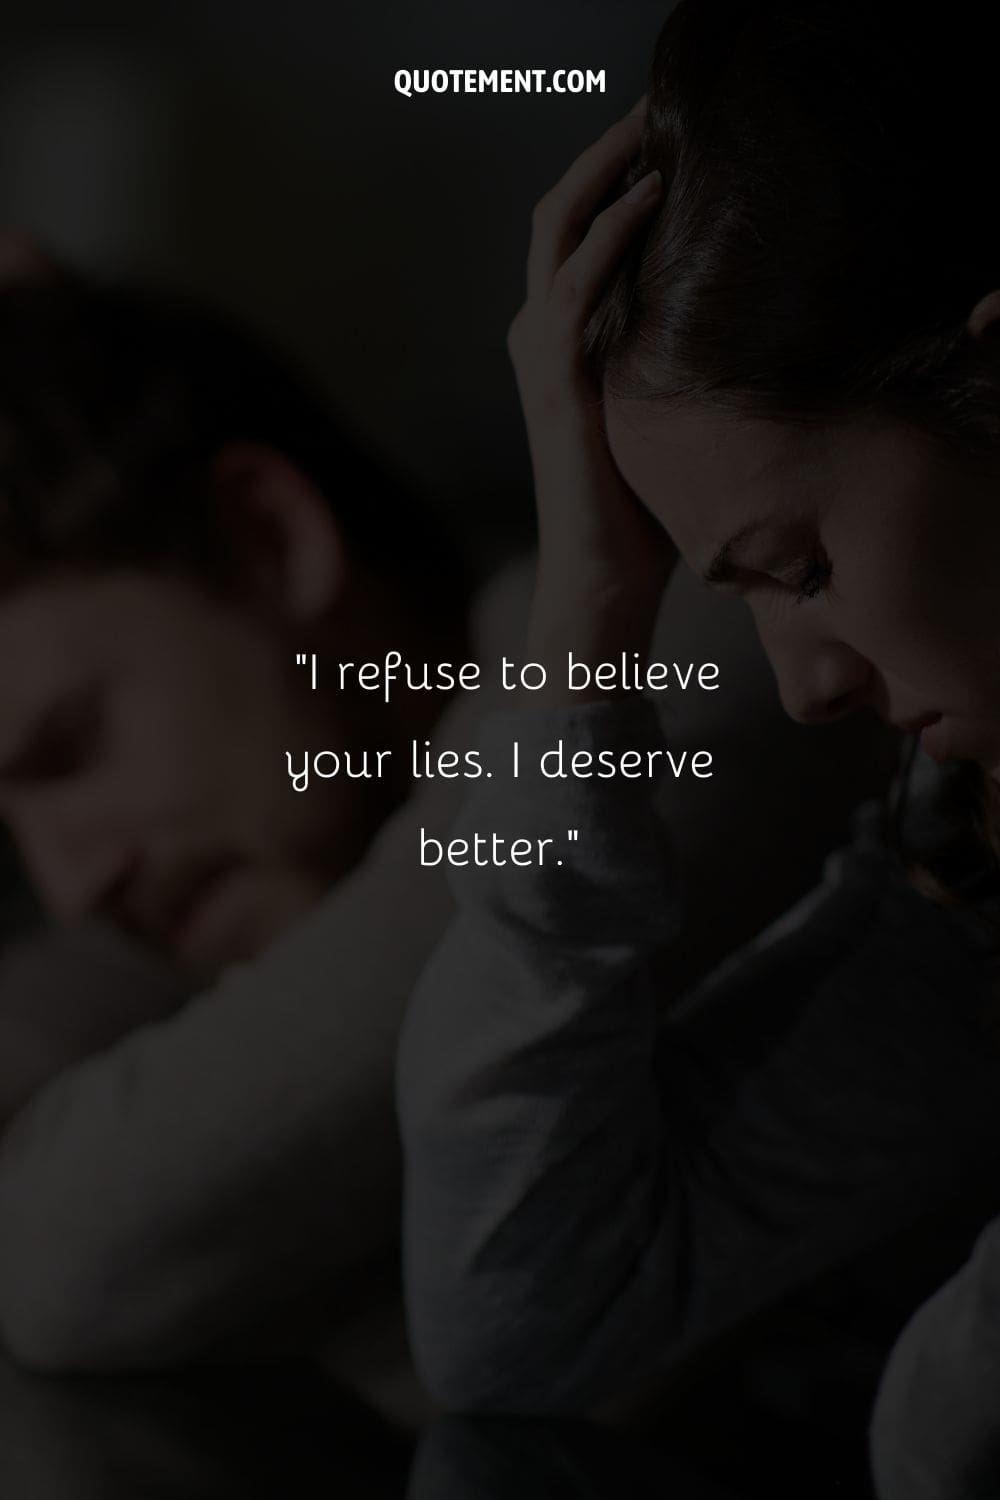 I refuse to believe your lies. I deserve better